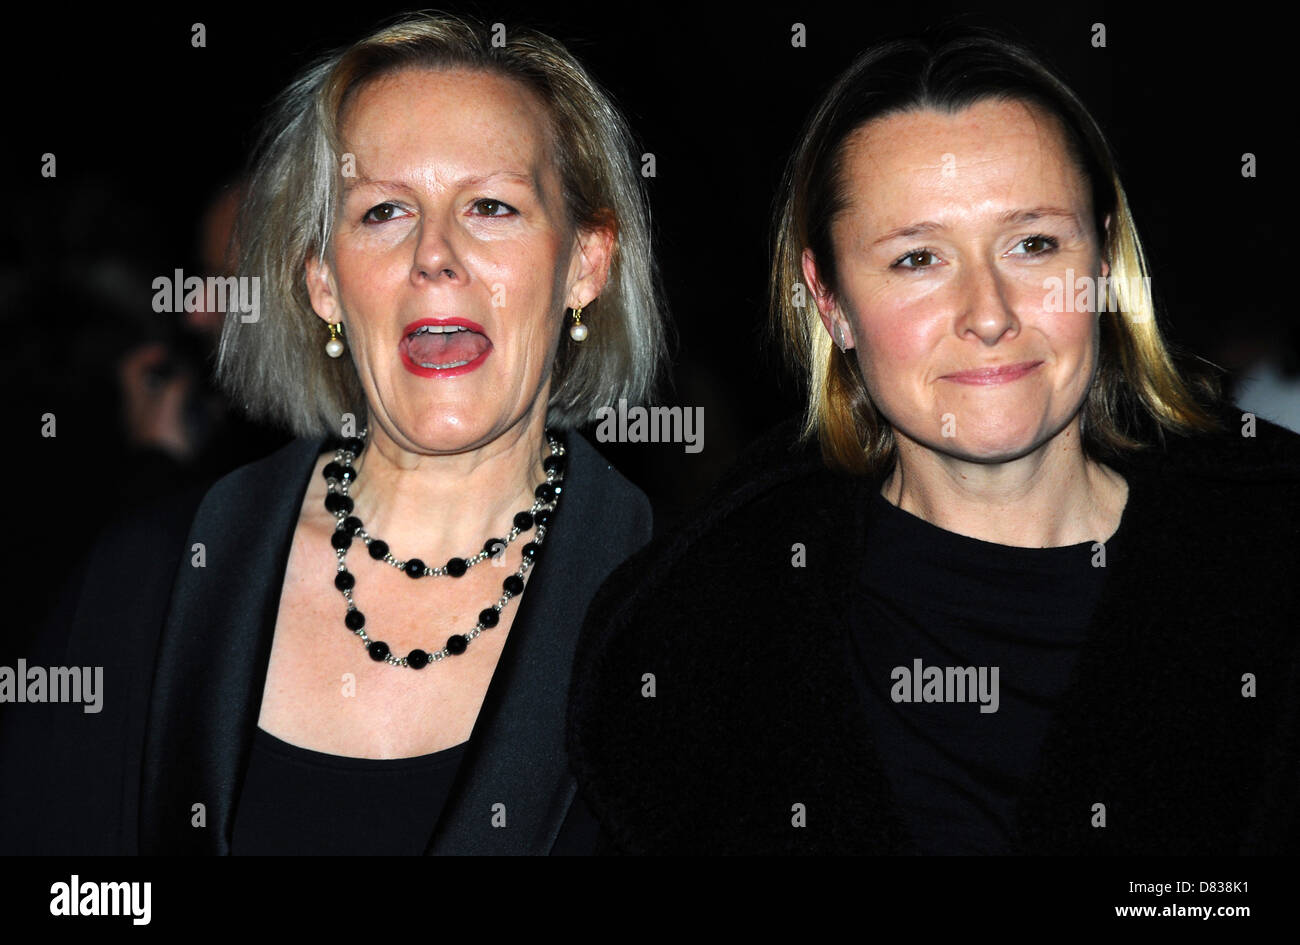 Phyllida Lloyd; Sarah Cooke 'The Iron Lady' UK film premiere held at the BFI Southbank - Arrivals London, England - 04.01.12 Stock Photo